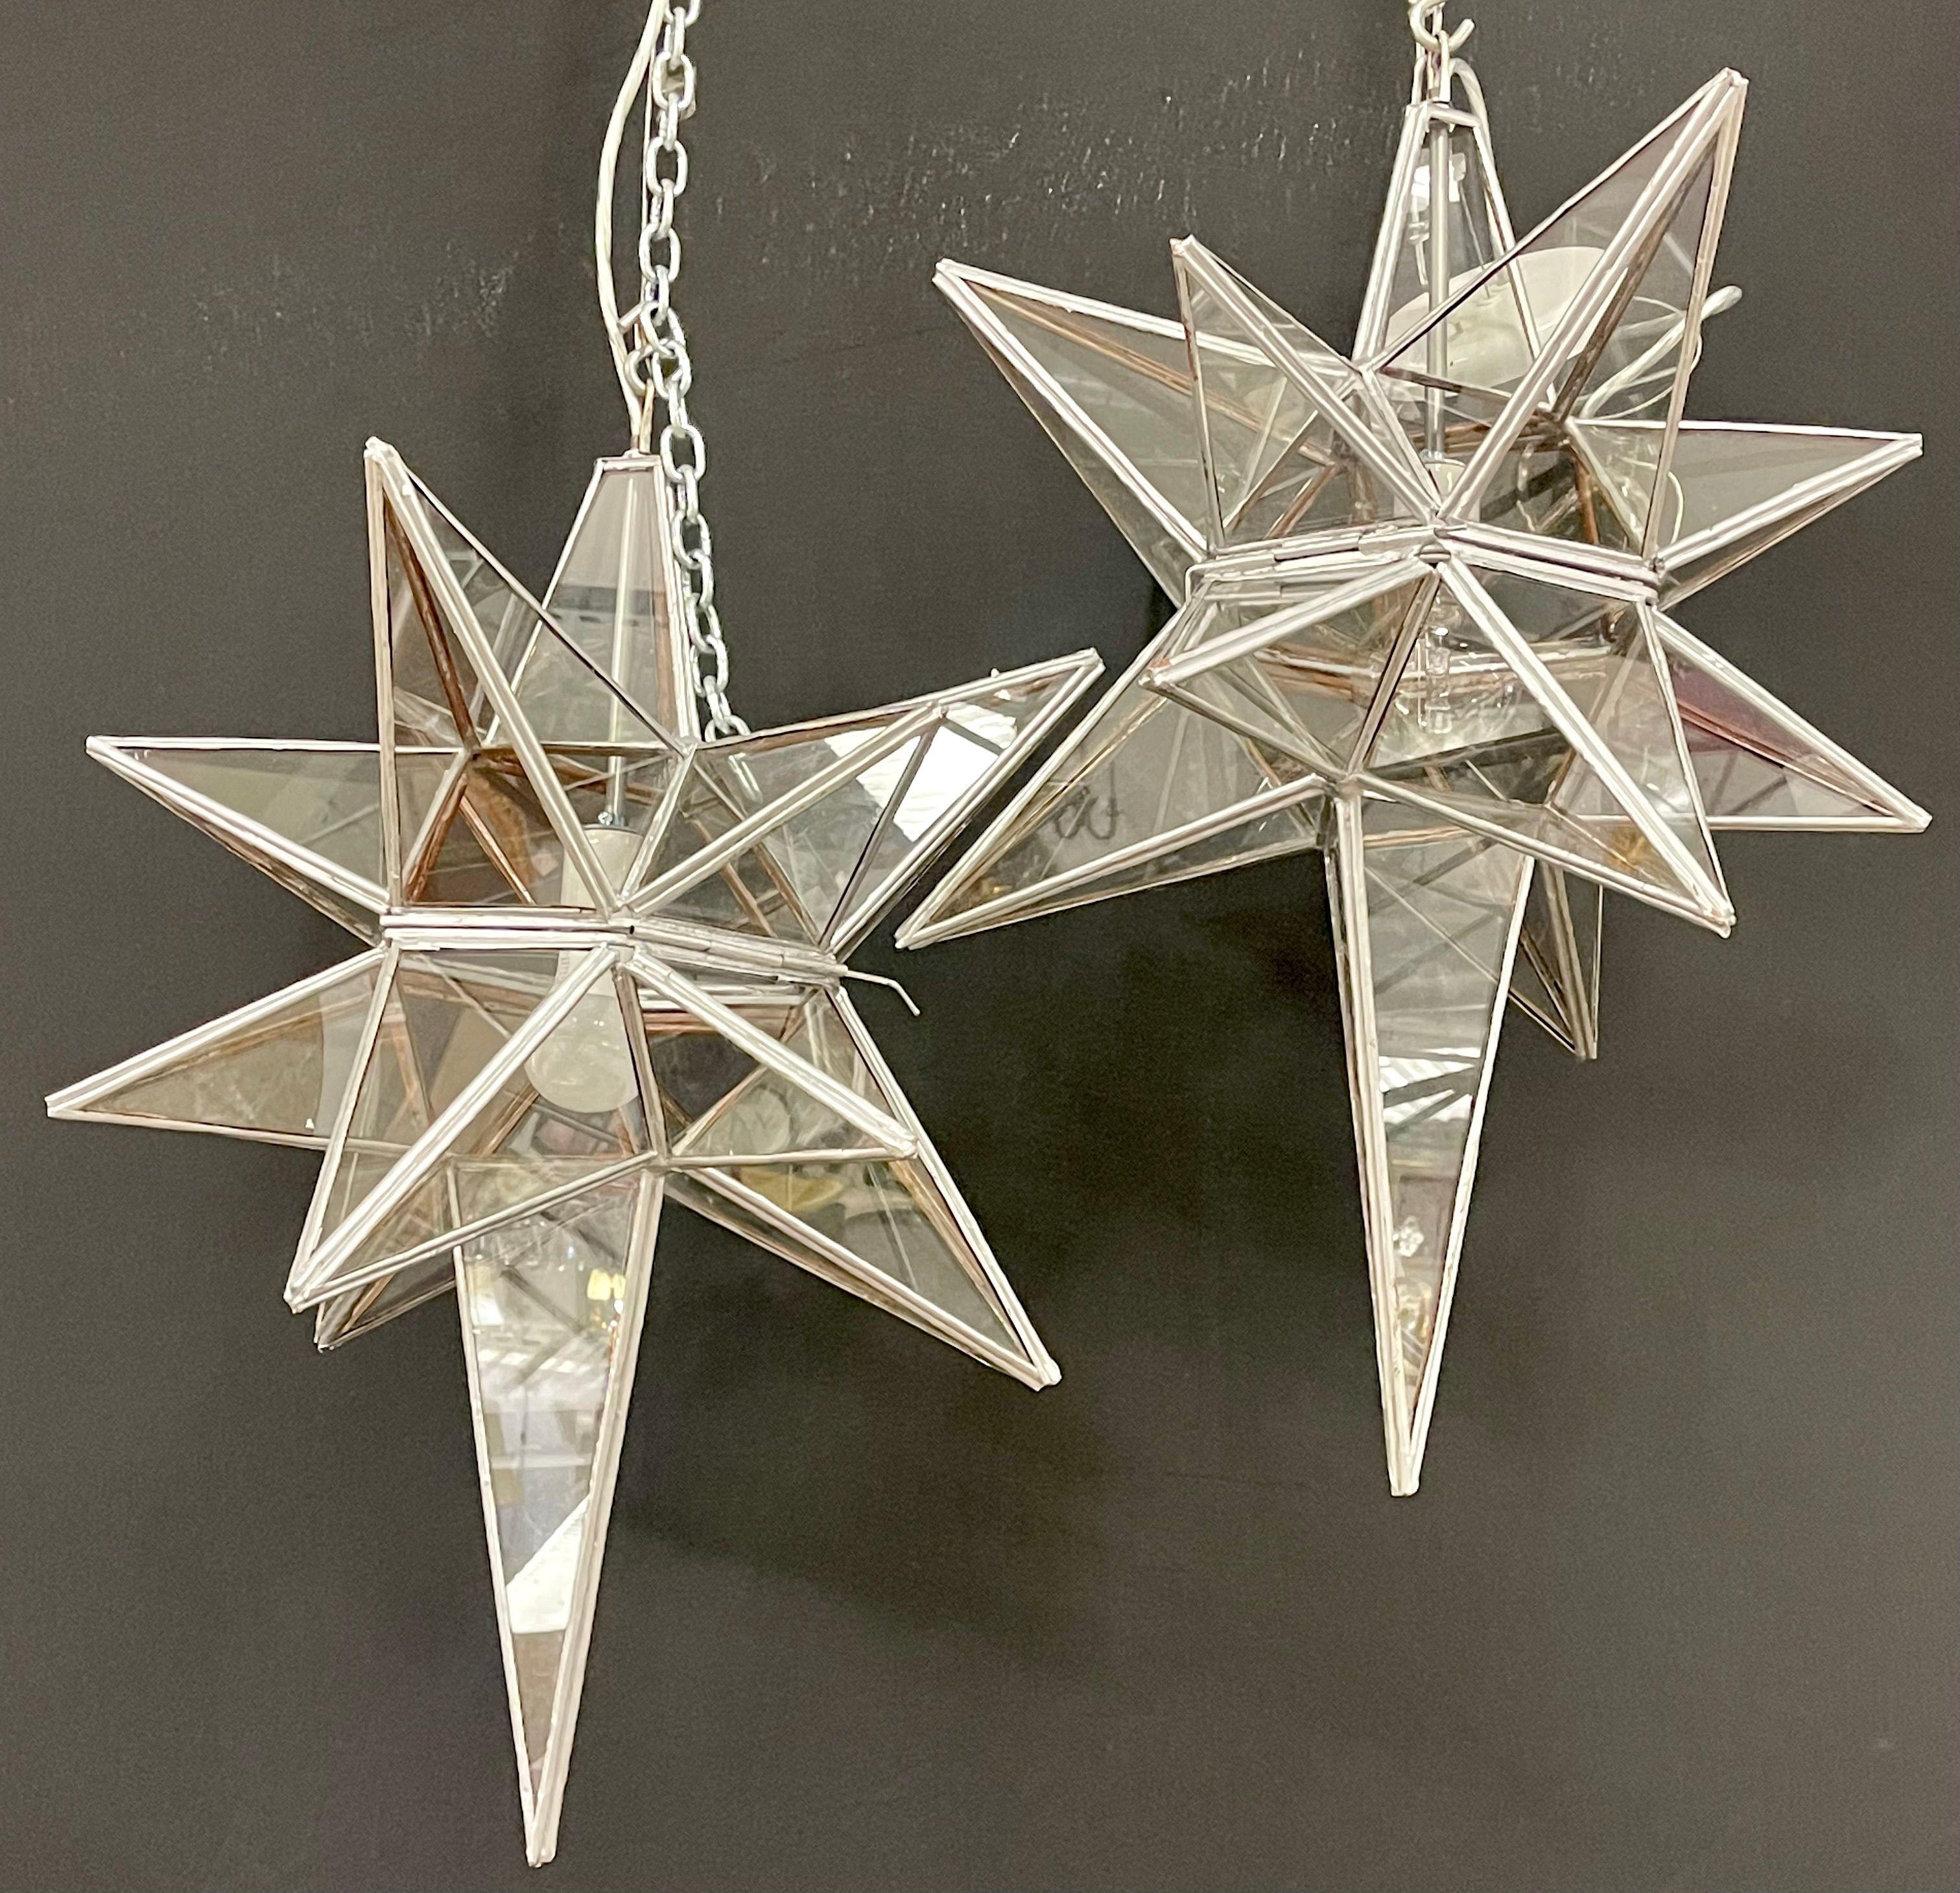 Pair of Sputnik star light fixtures glass Art Deco style. Each with a matching chair and canopy. Tucker Robbins Star Lights in a custom pewter finish.


RitaTeichnerIZXA.